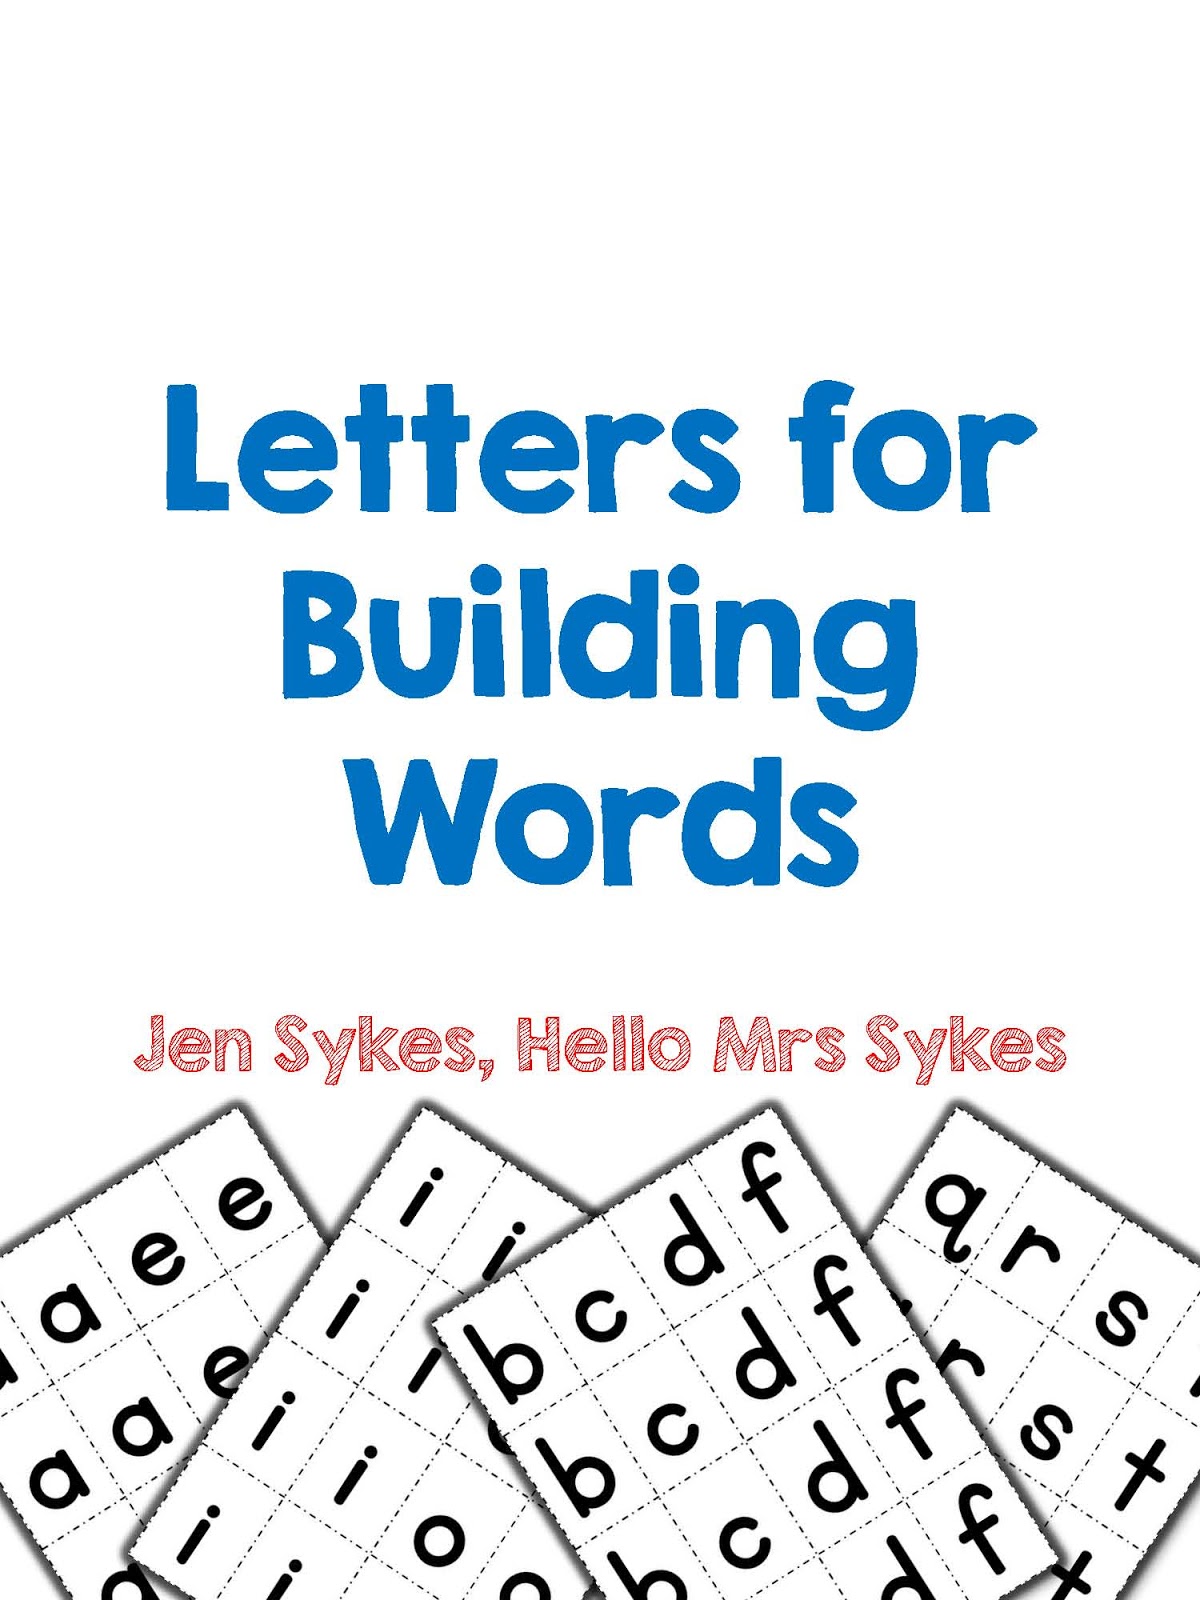 letters-for-building-words-free-download-hello-mrs-sykes